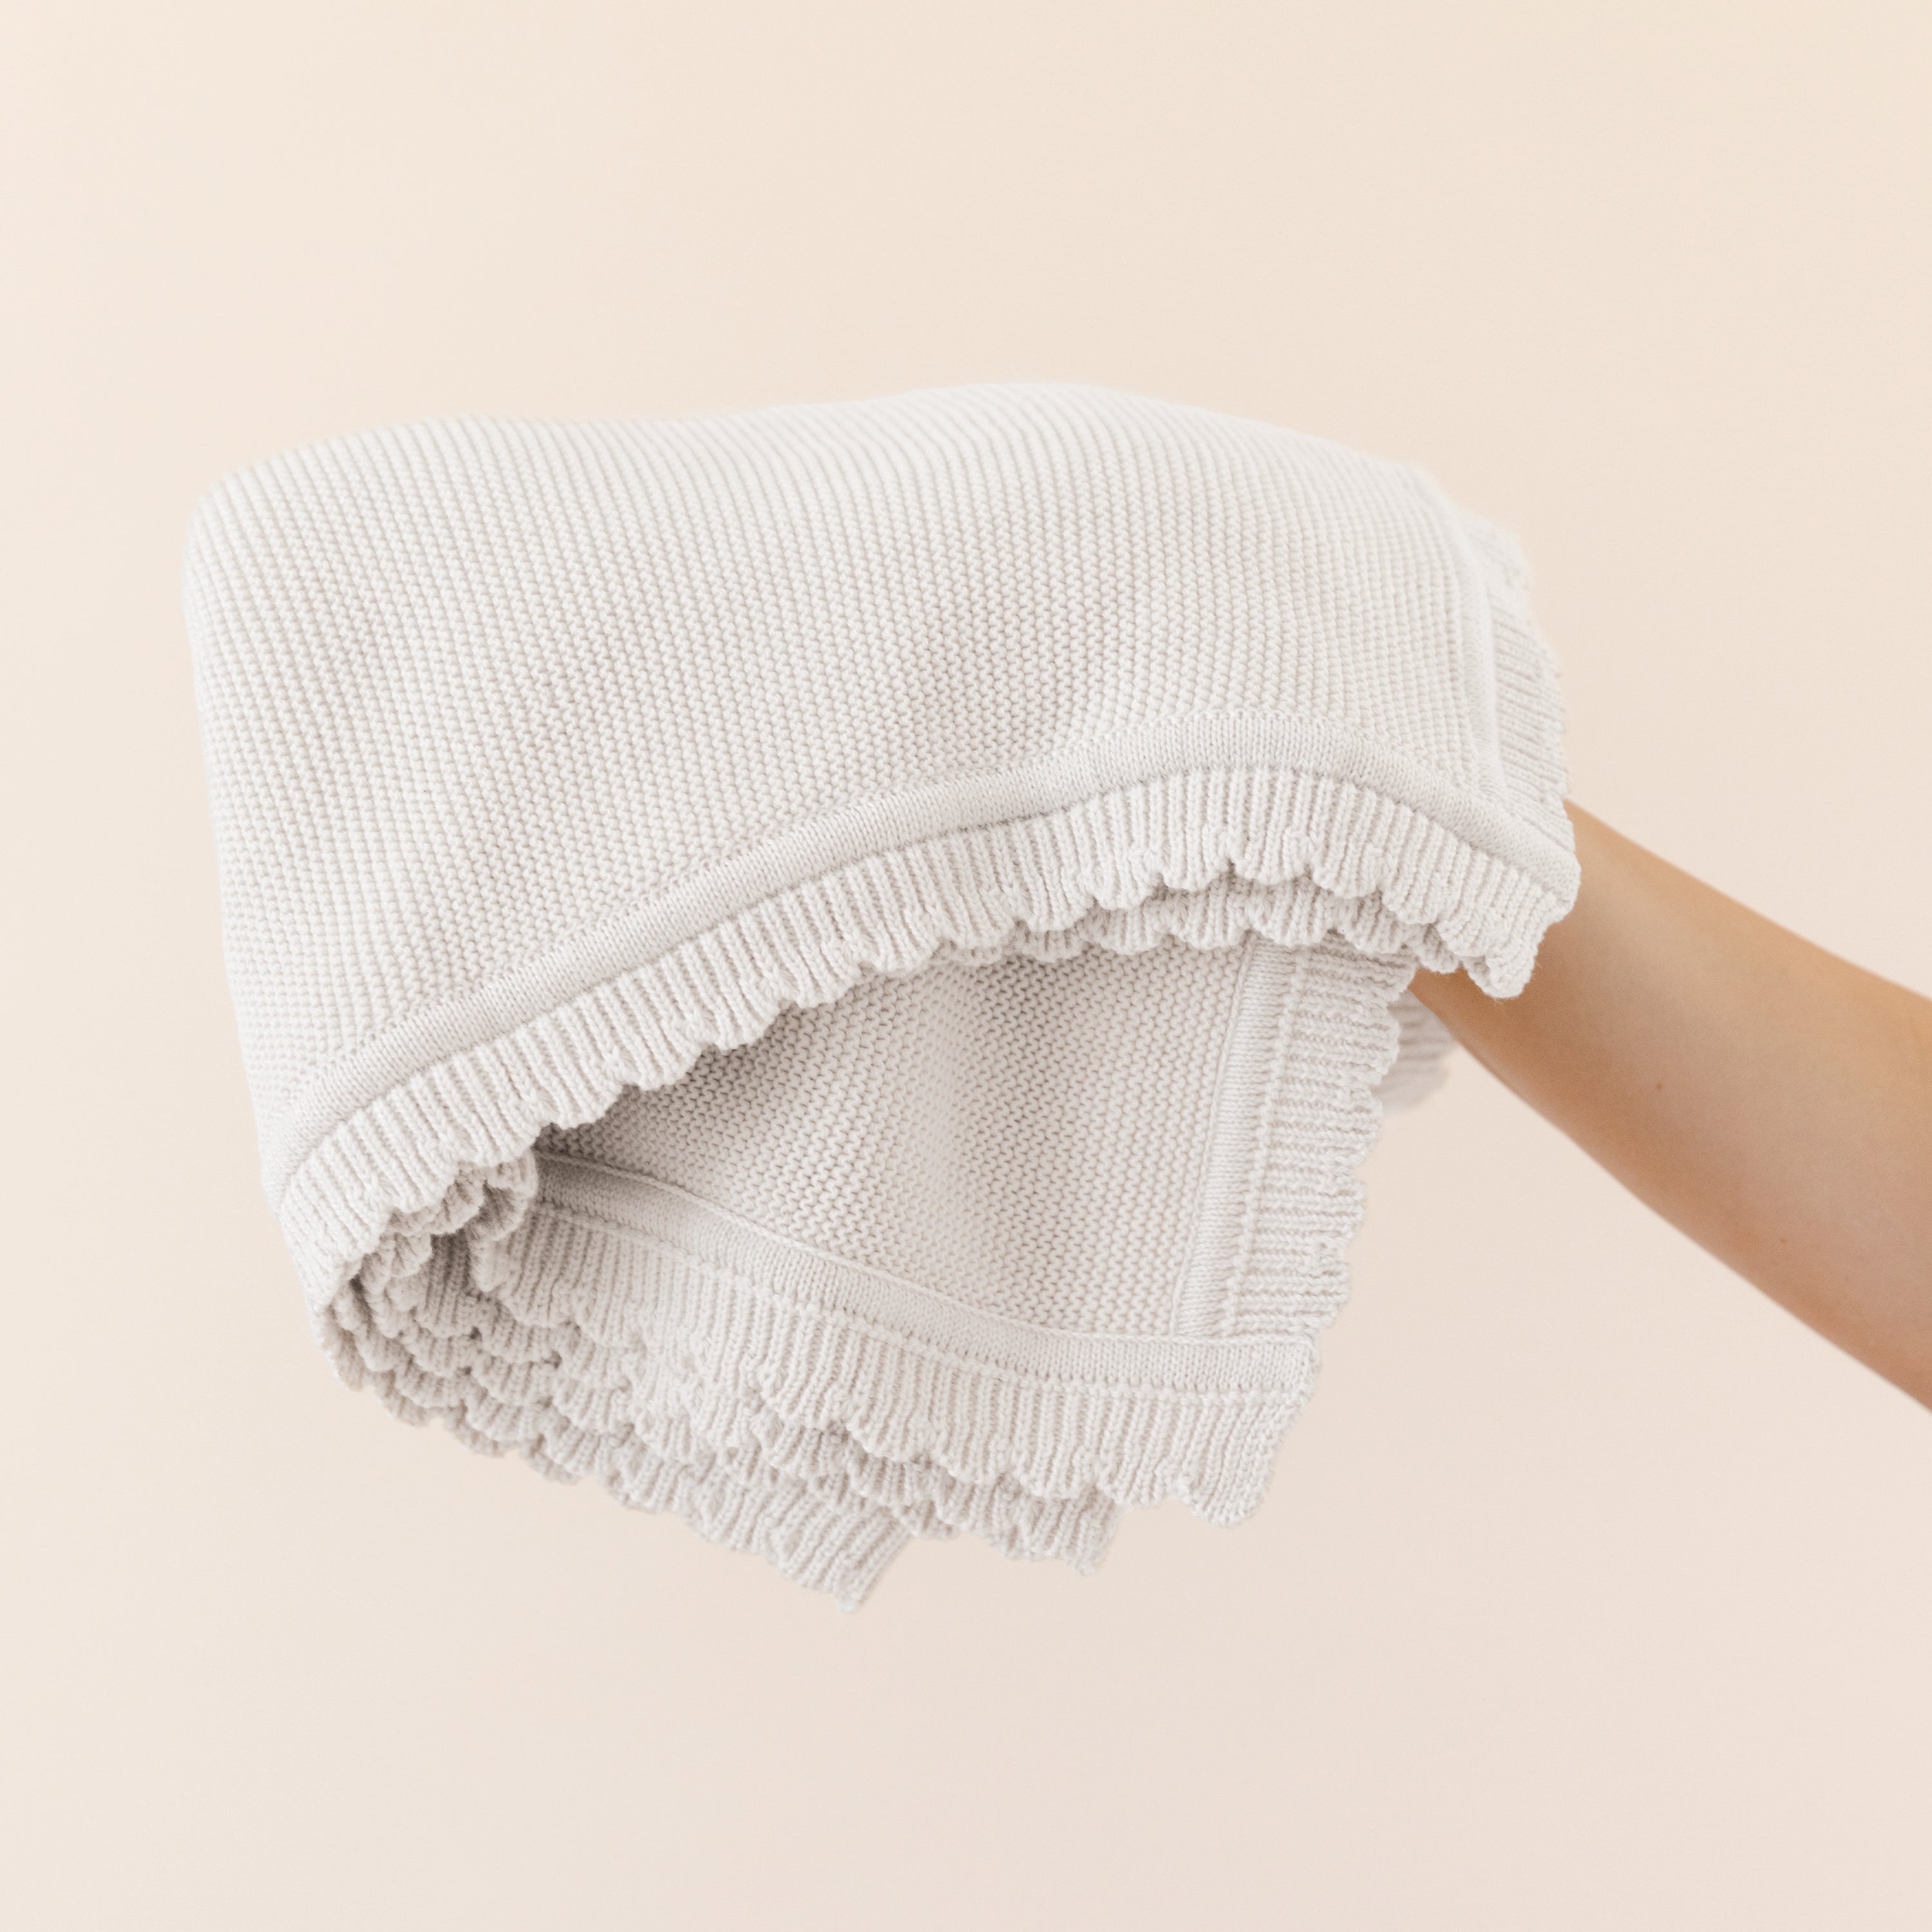 A person holding a folded Organic Cotton Scalloped Baby Blanket - Ella Ivory by Makemake Organics with a textured pattern and fringed edges against a soft beige background.